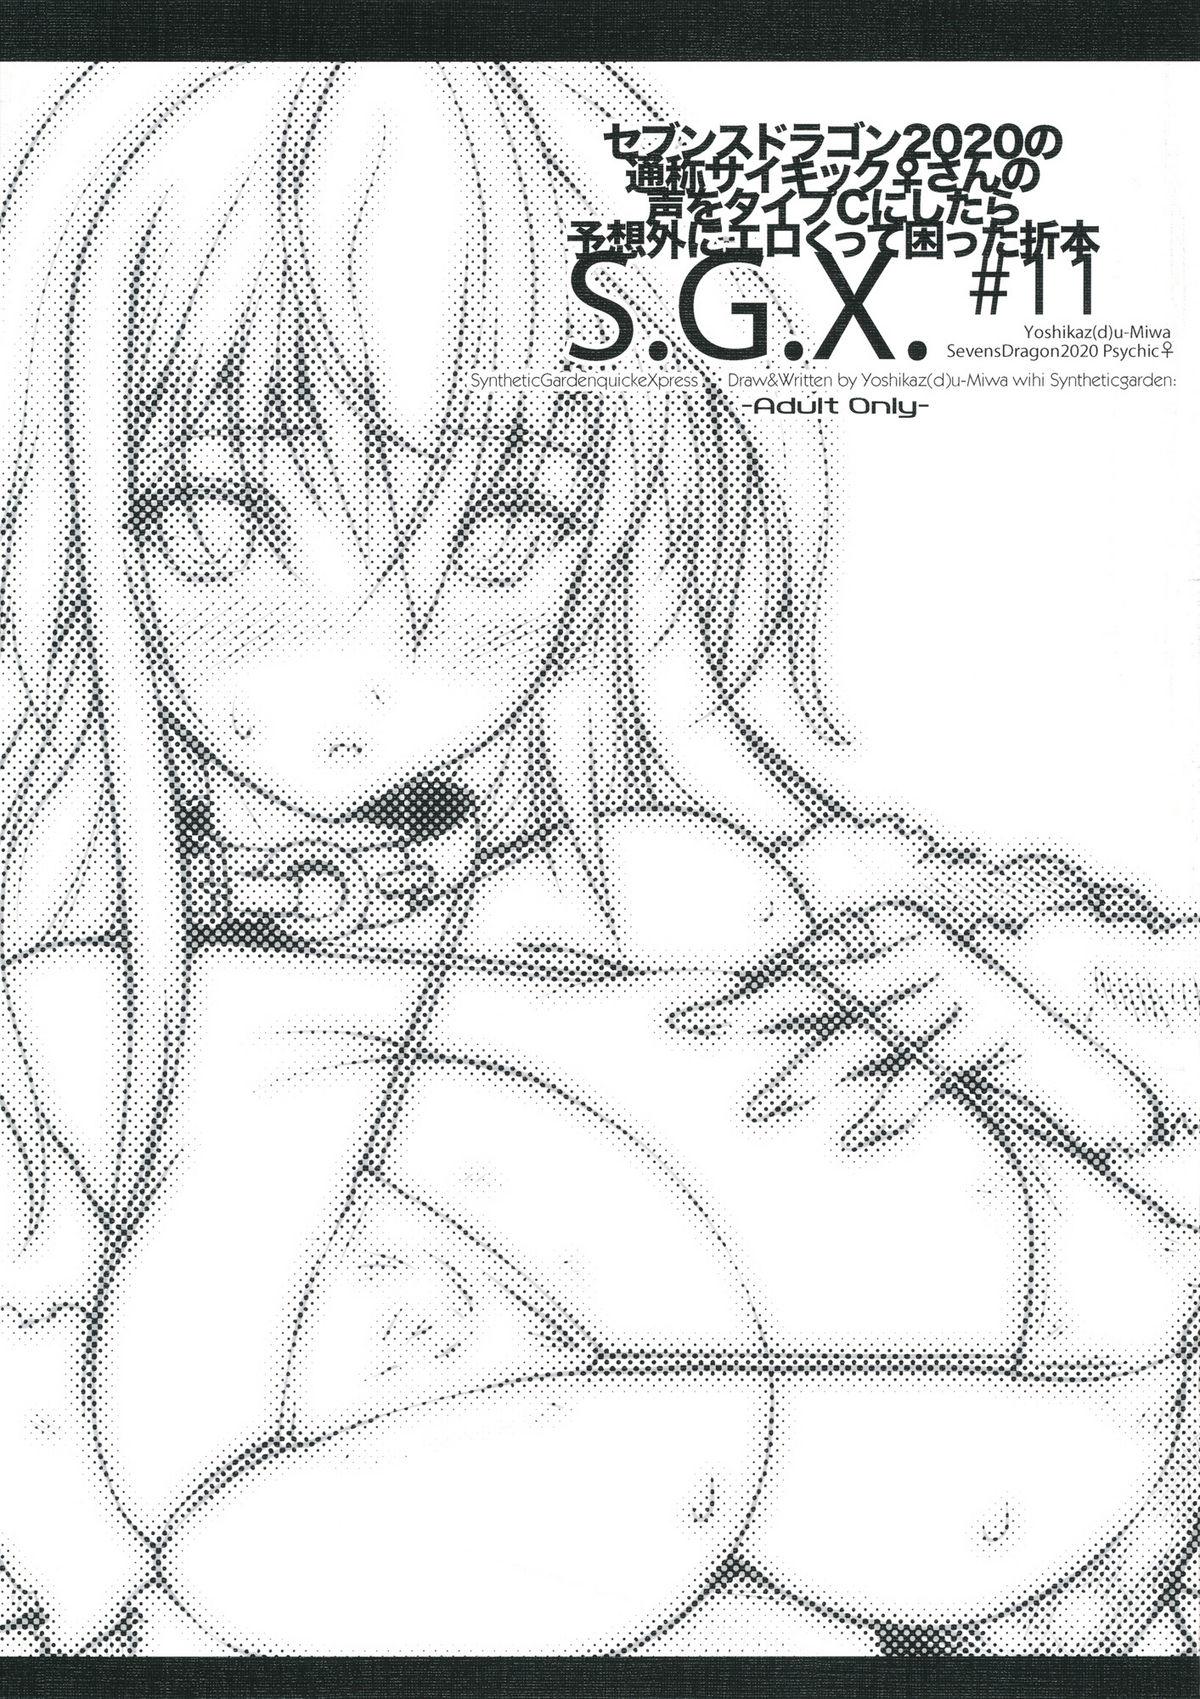 Hentai S.G.X. #11 - 7th dragon Indoor - Page 1